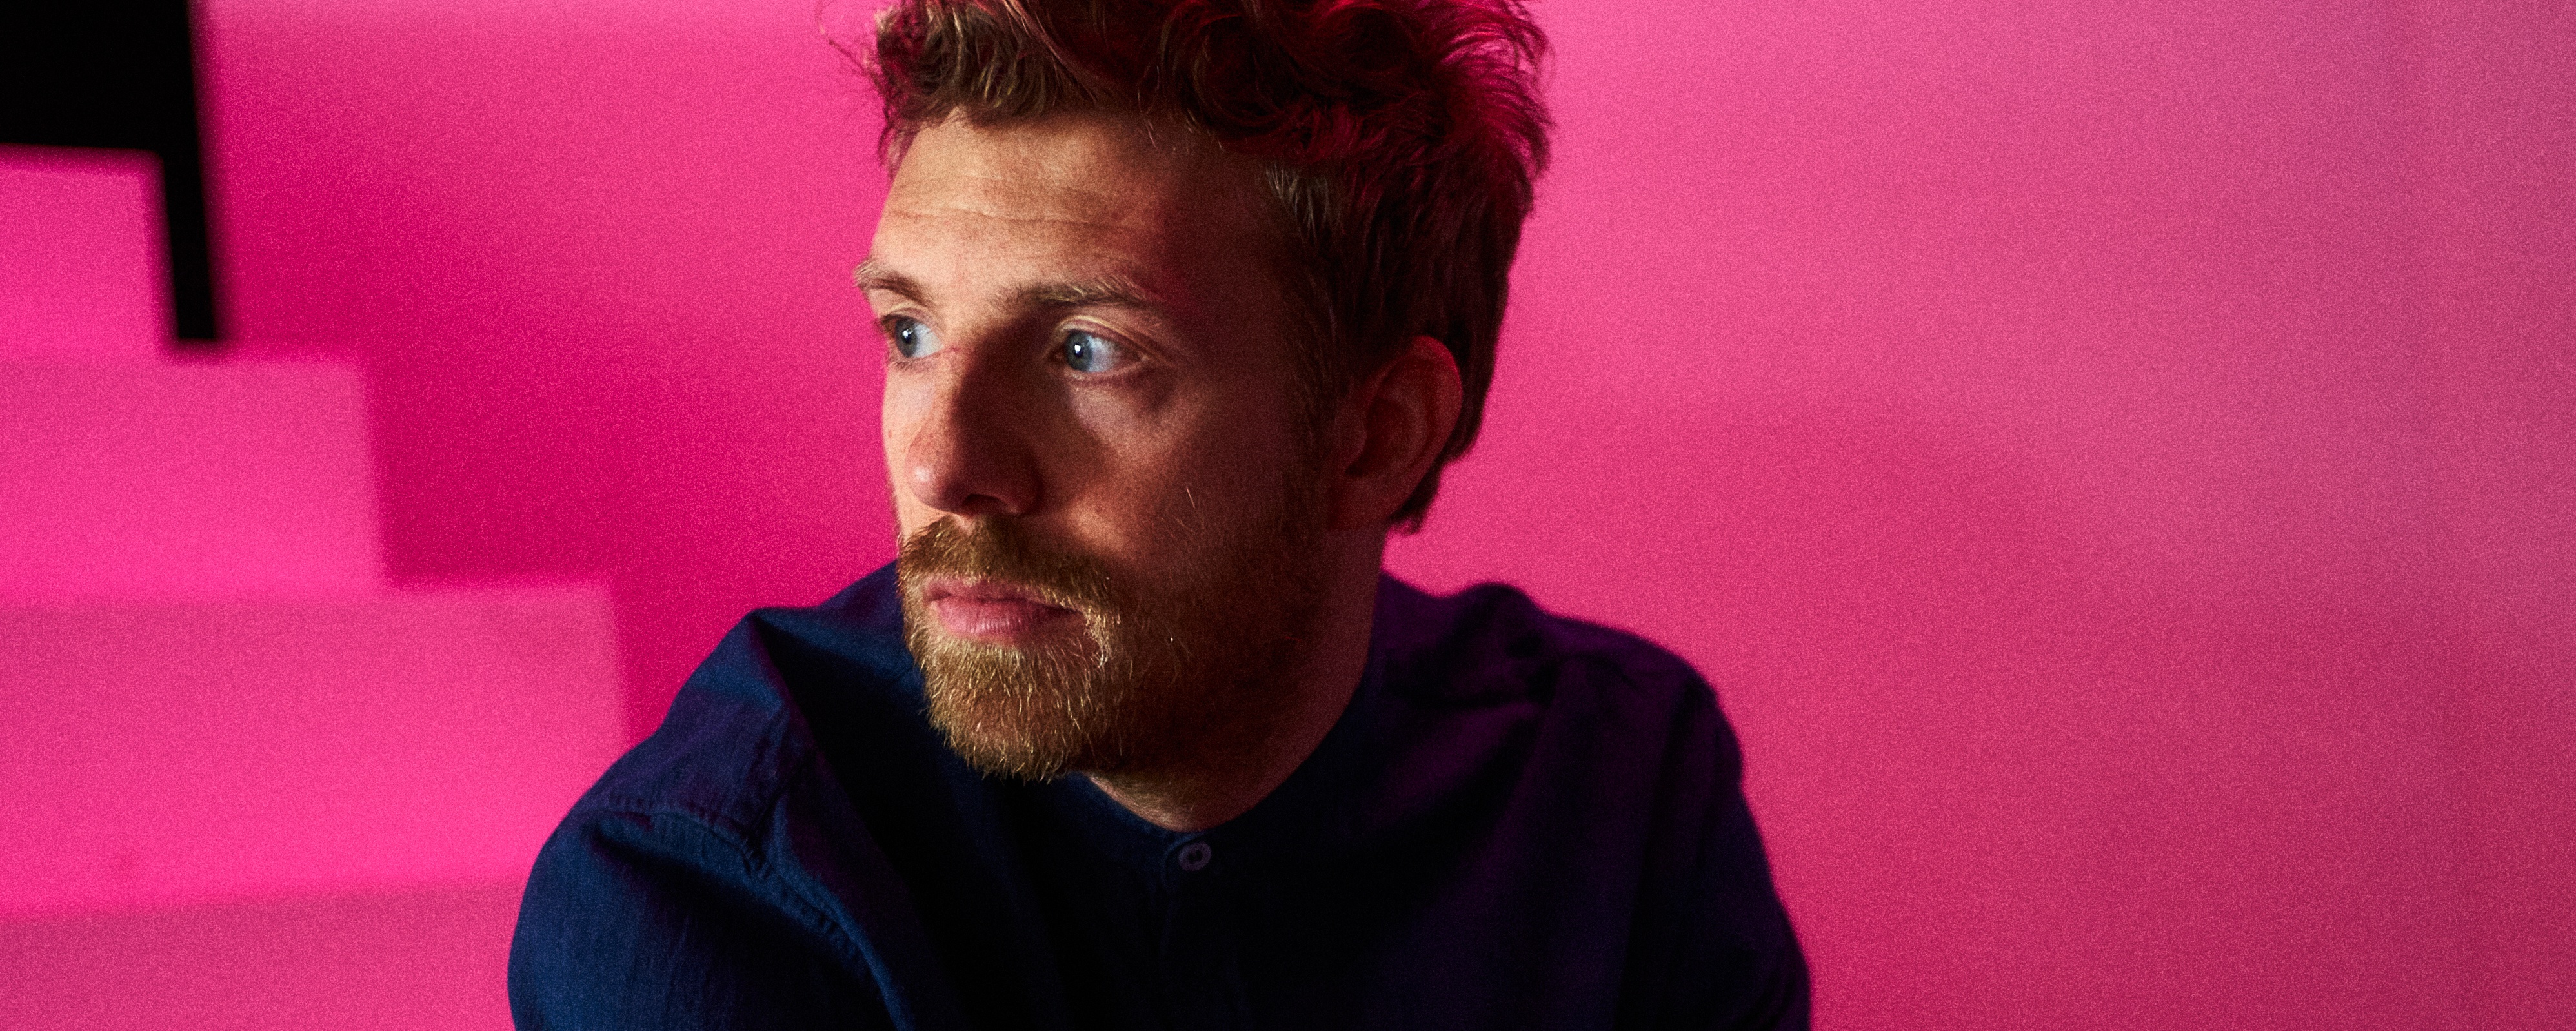 Andrew Belle Explores The Unhealthy Things We Love On Introspective New Record, ‘Nightshade’